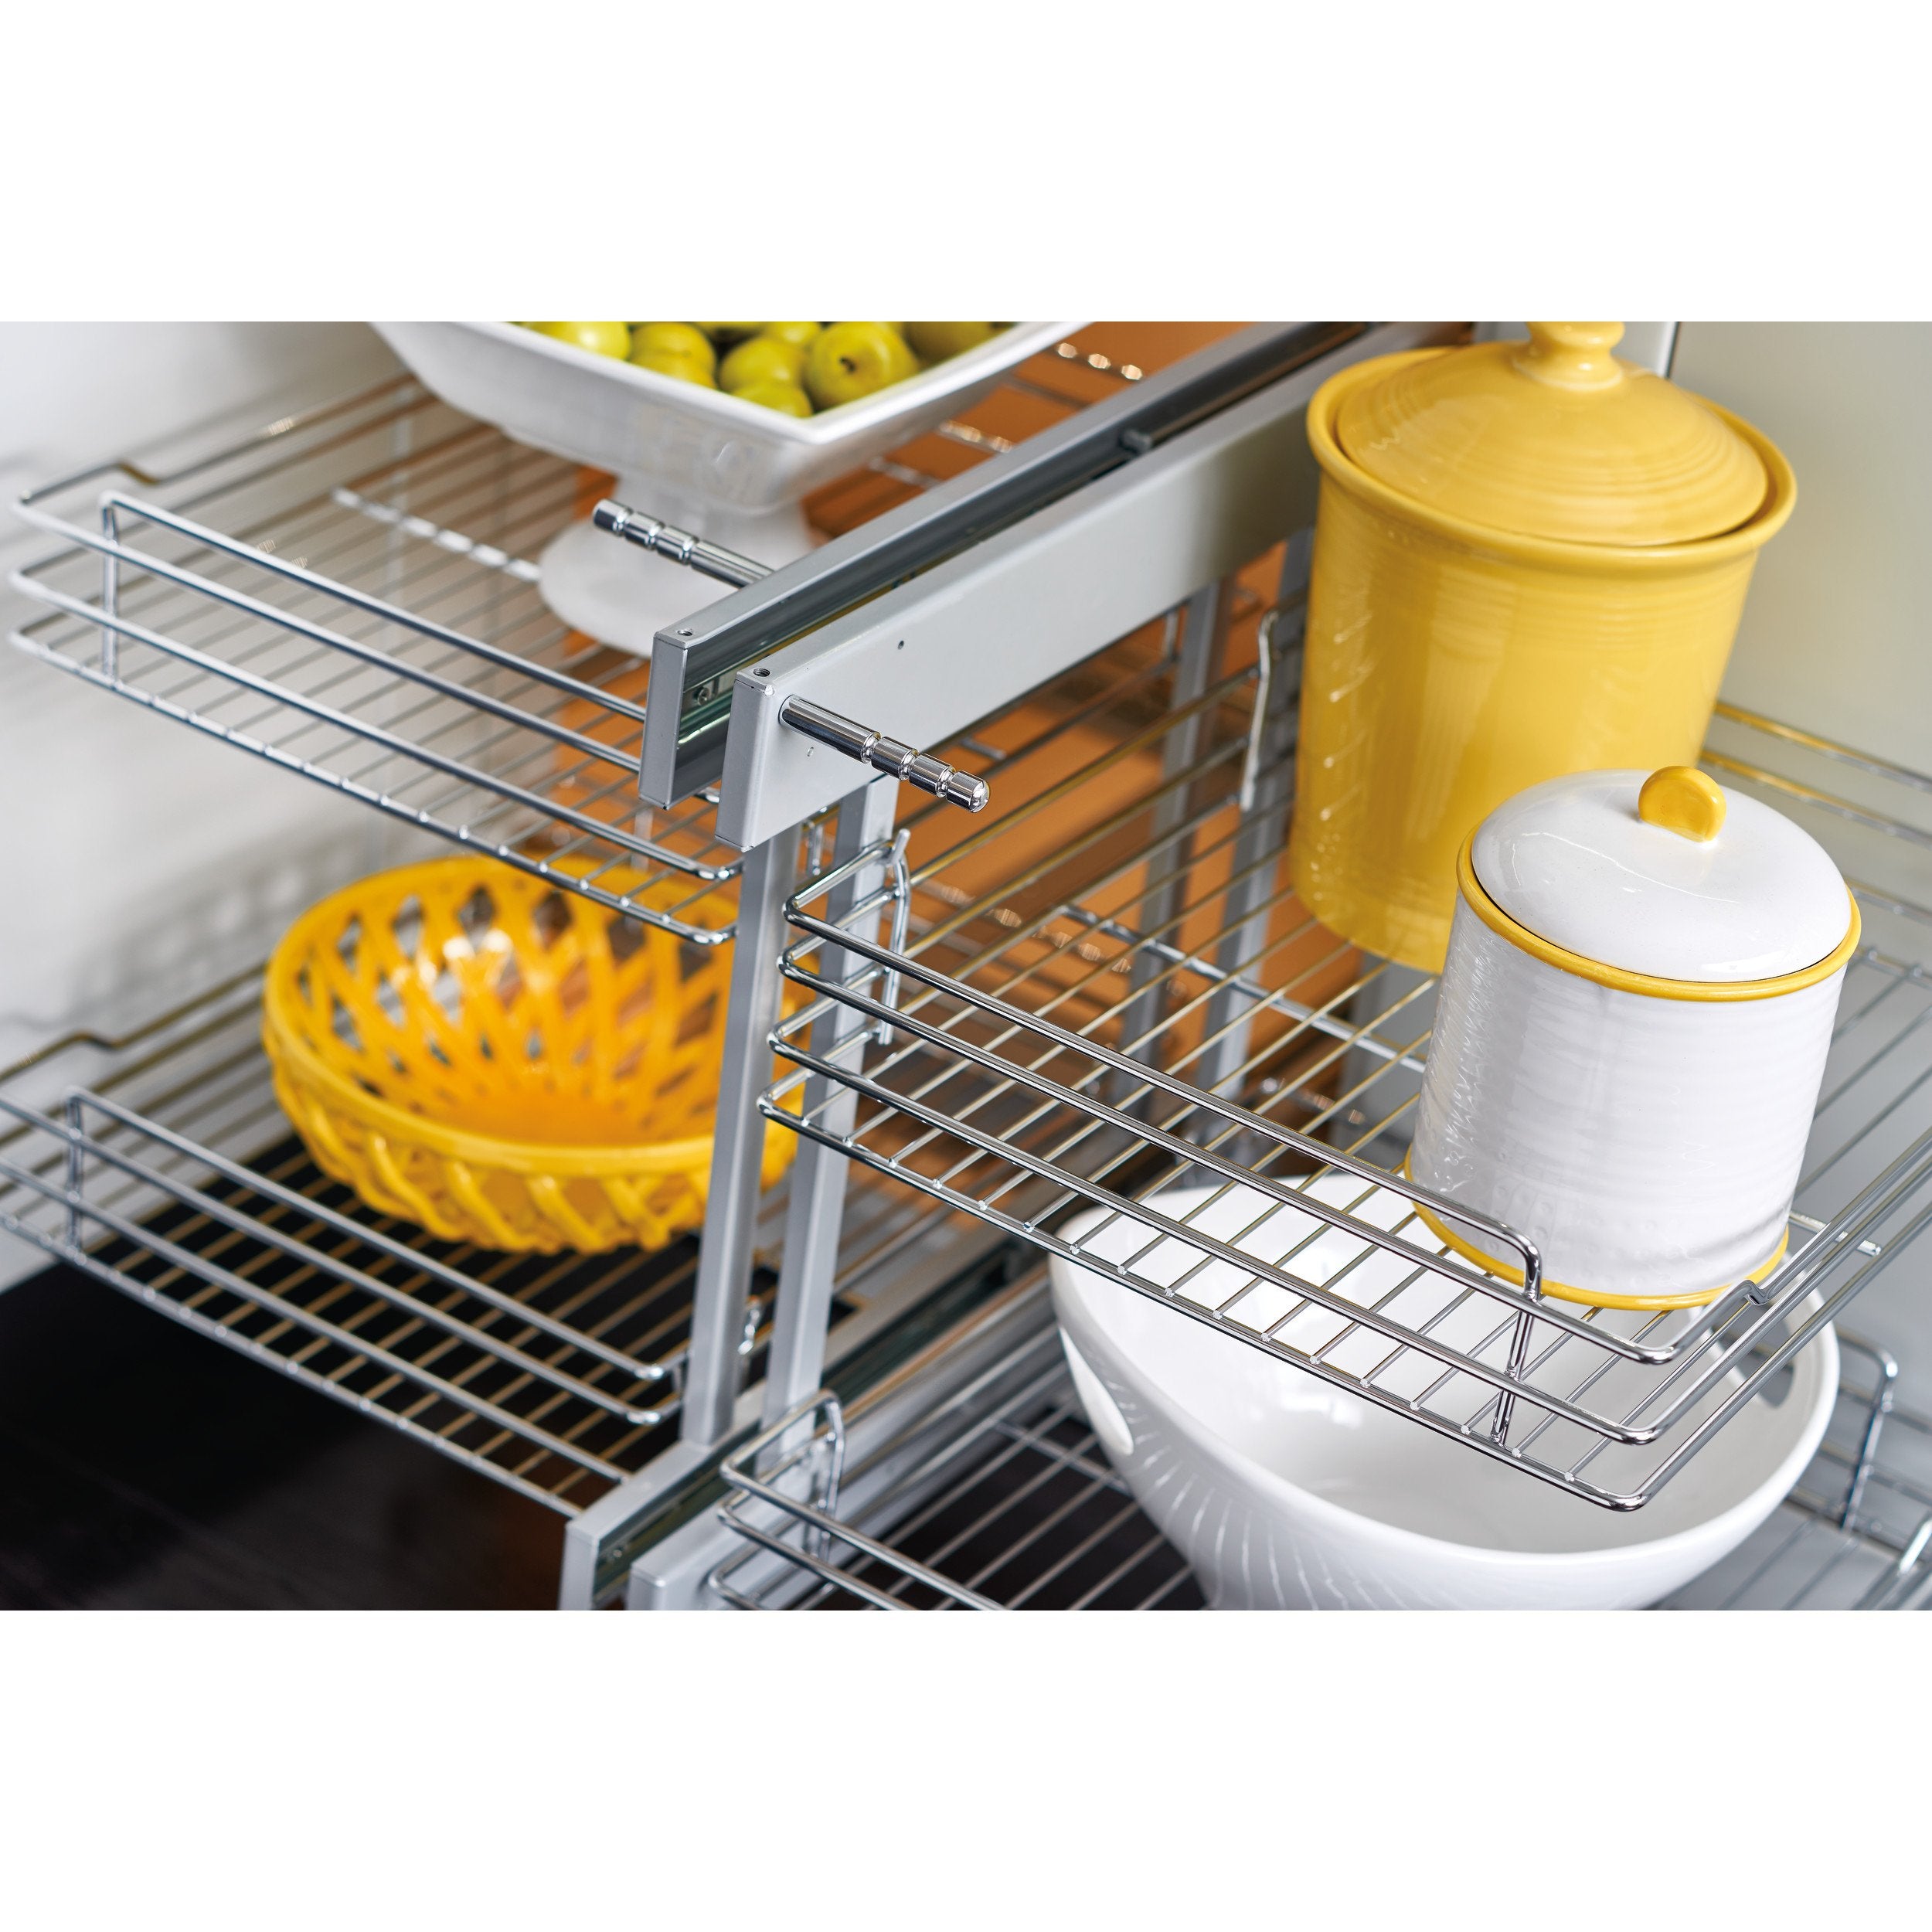 Rev-A-Shelf 15 in. Blind Corner Cabinet Pull-Out Chrome 2-Tier